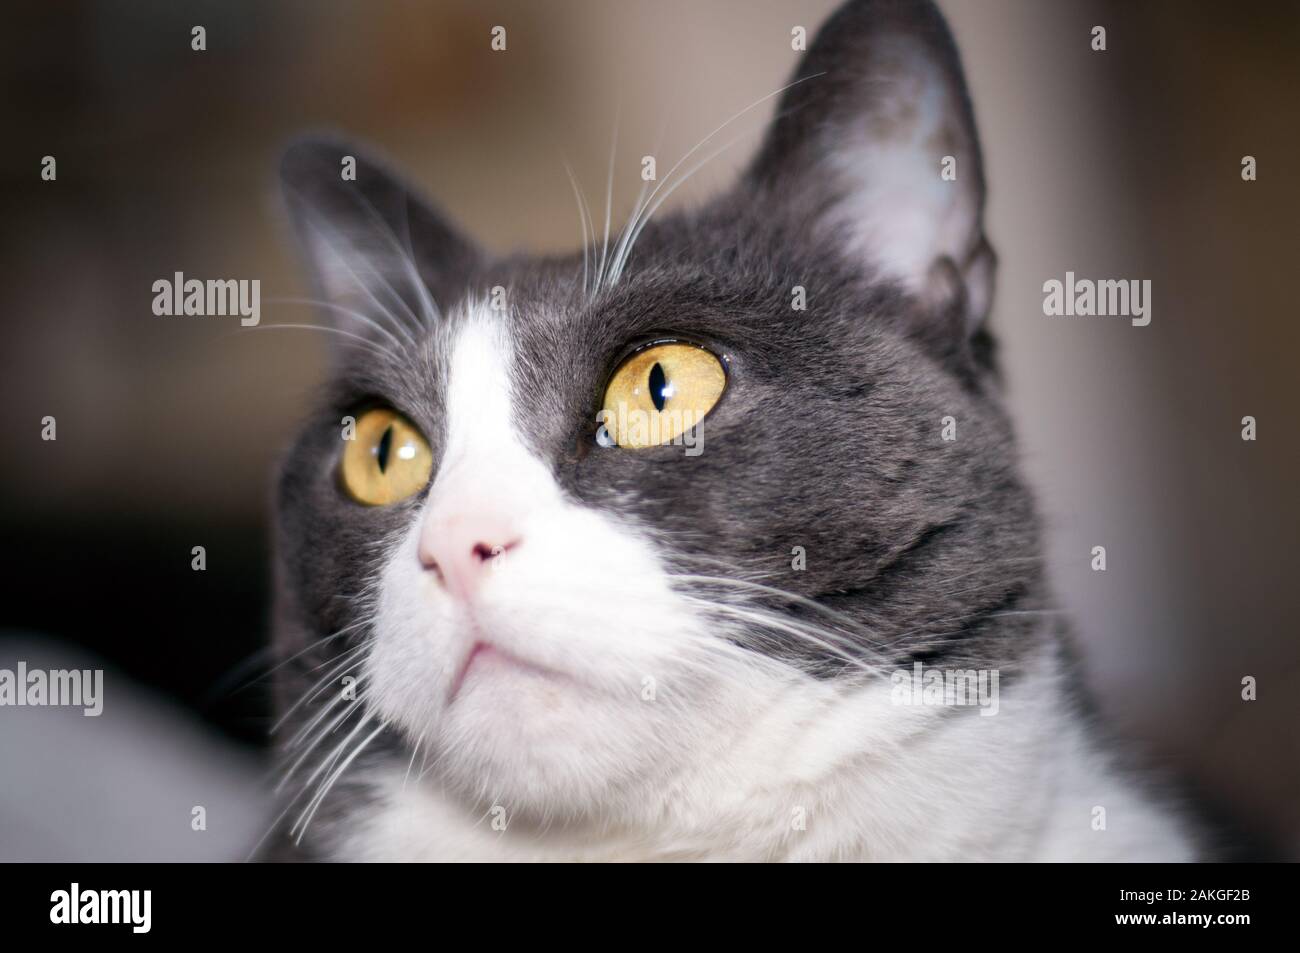 closeup of a beautiful, white and grey female cat with orange/yellow eyes. Alert cat Stock Photo